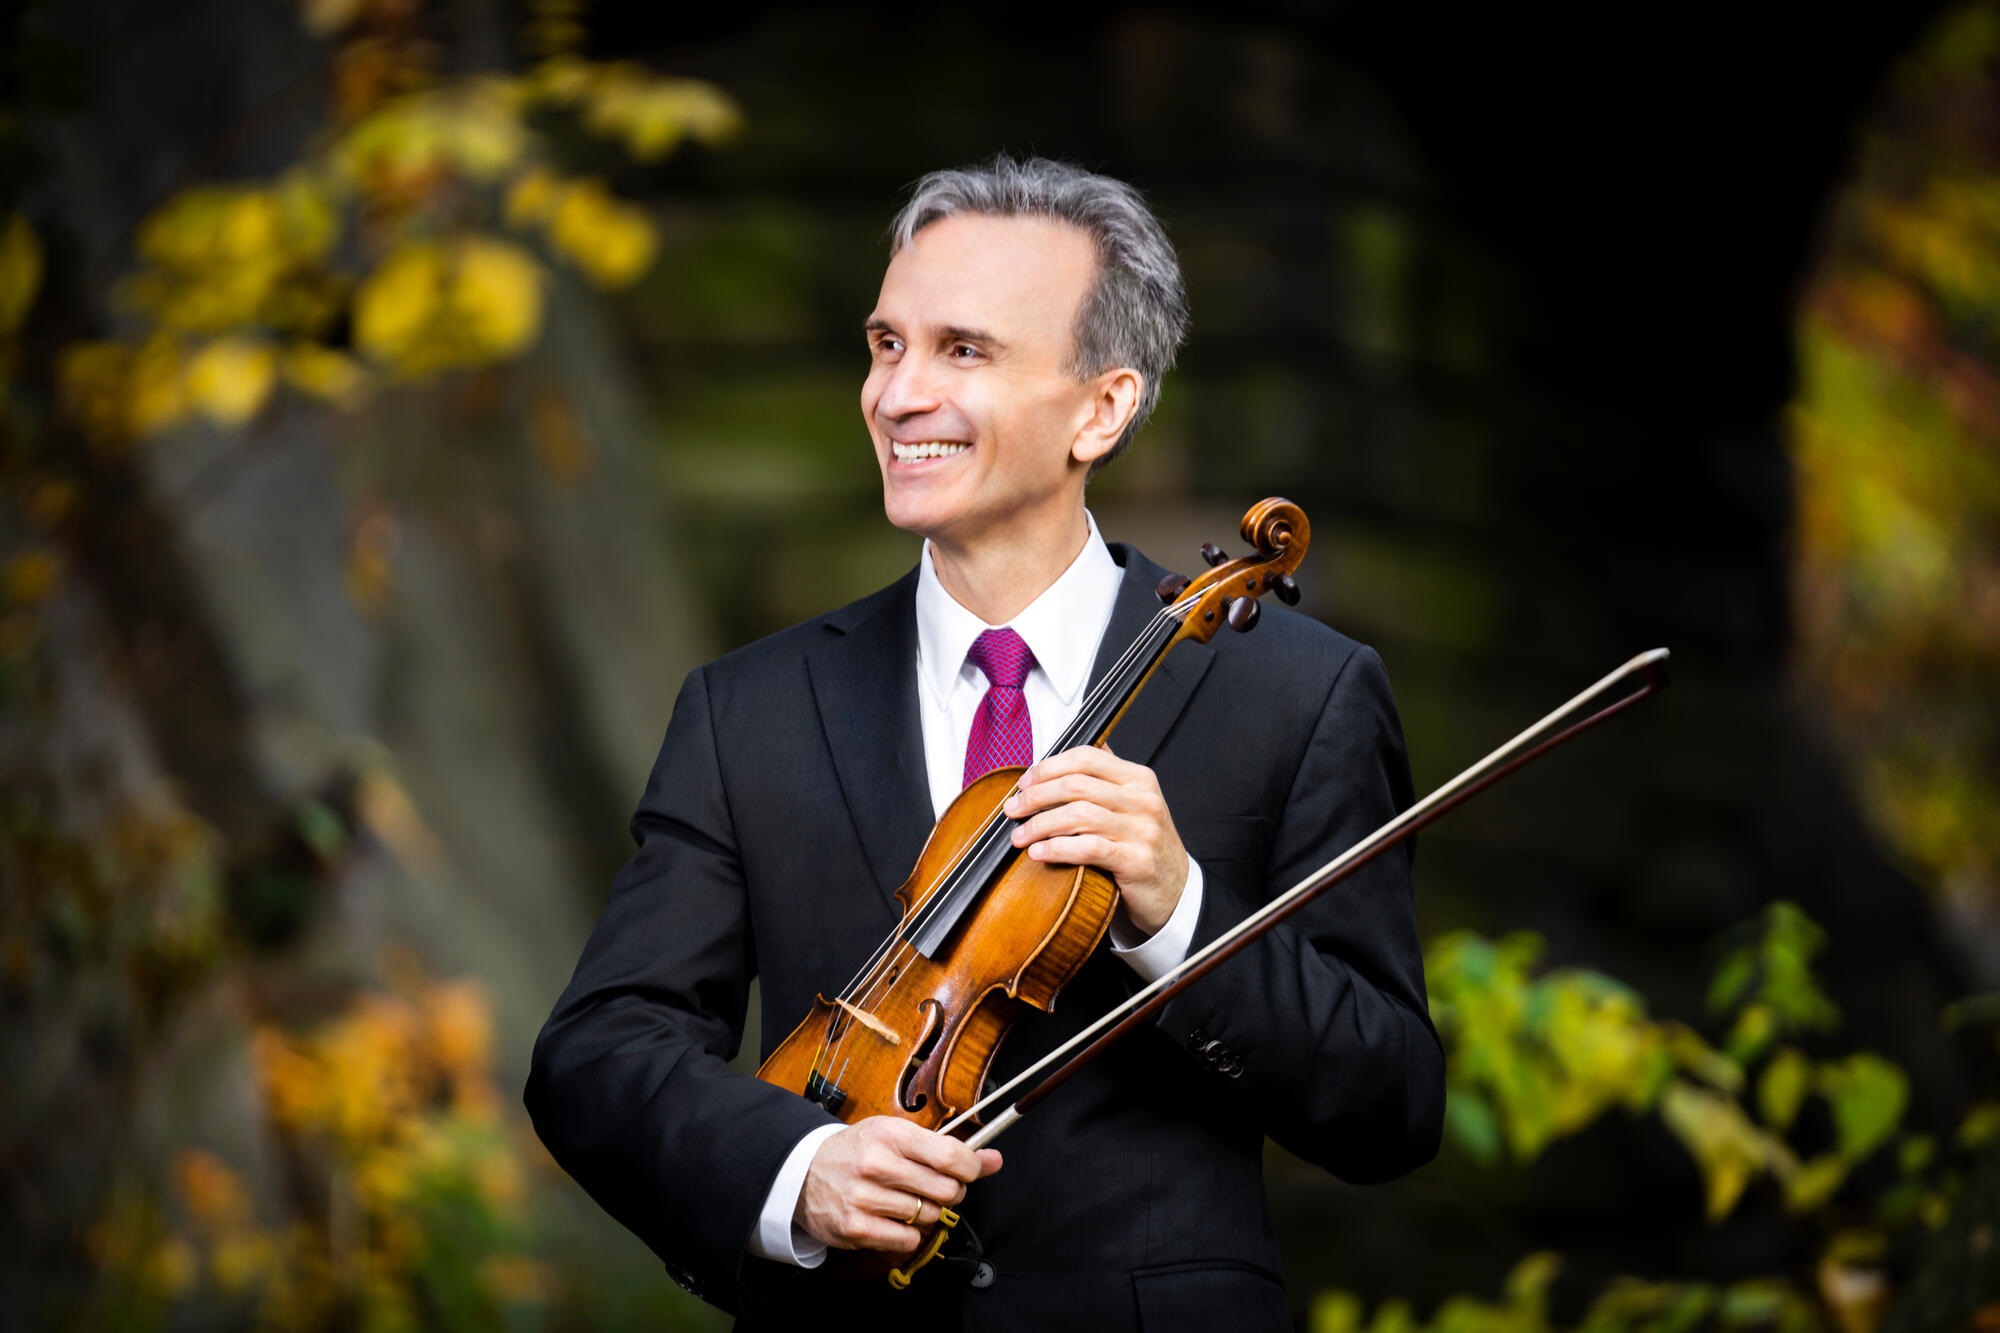 Gil Shaham with violin smiling in a suit and tie, trees behind